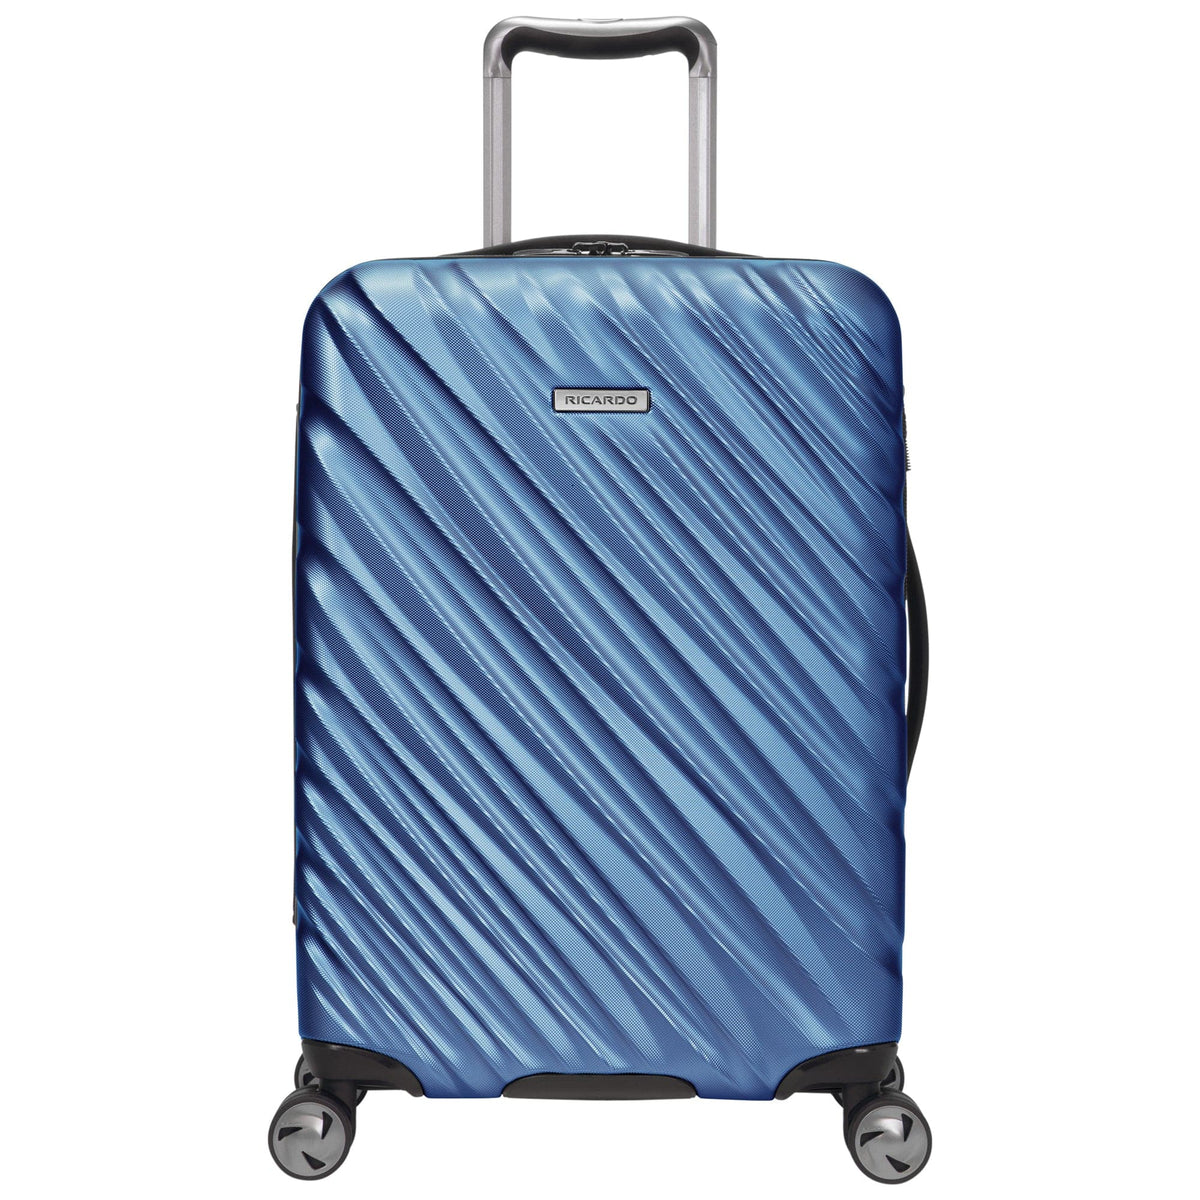 Ricardo Beverly Hills Mojave Carry-On Luggage 